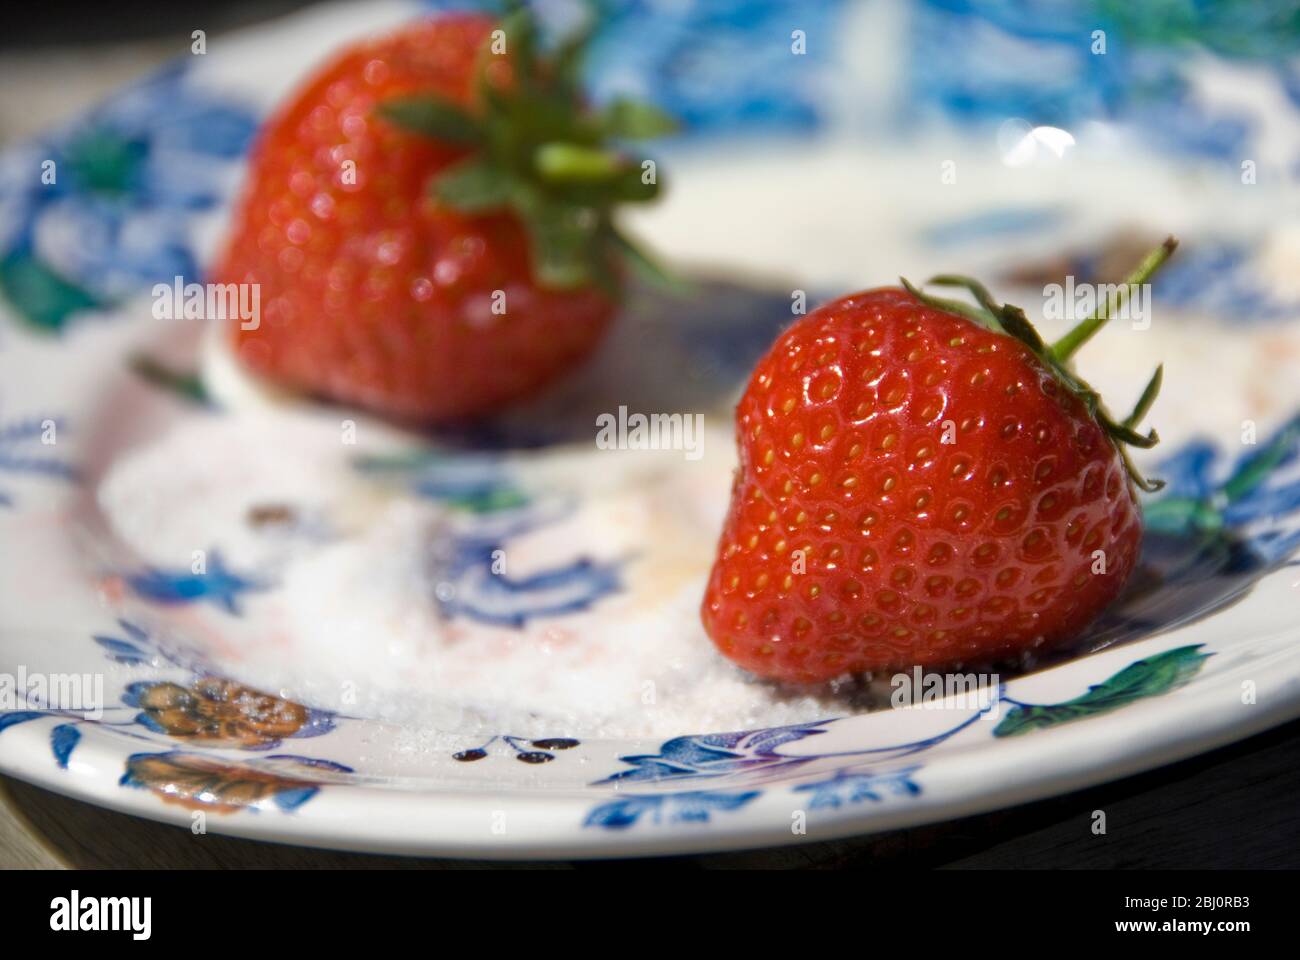 Two strawberries on a patterned plate outside in sunshine - Stock Photo